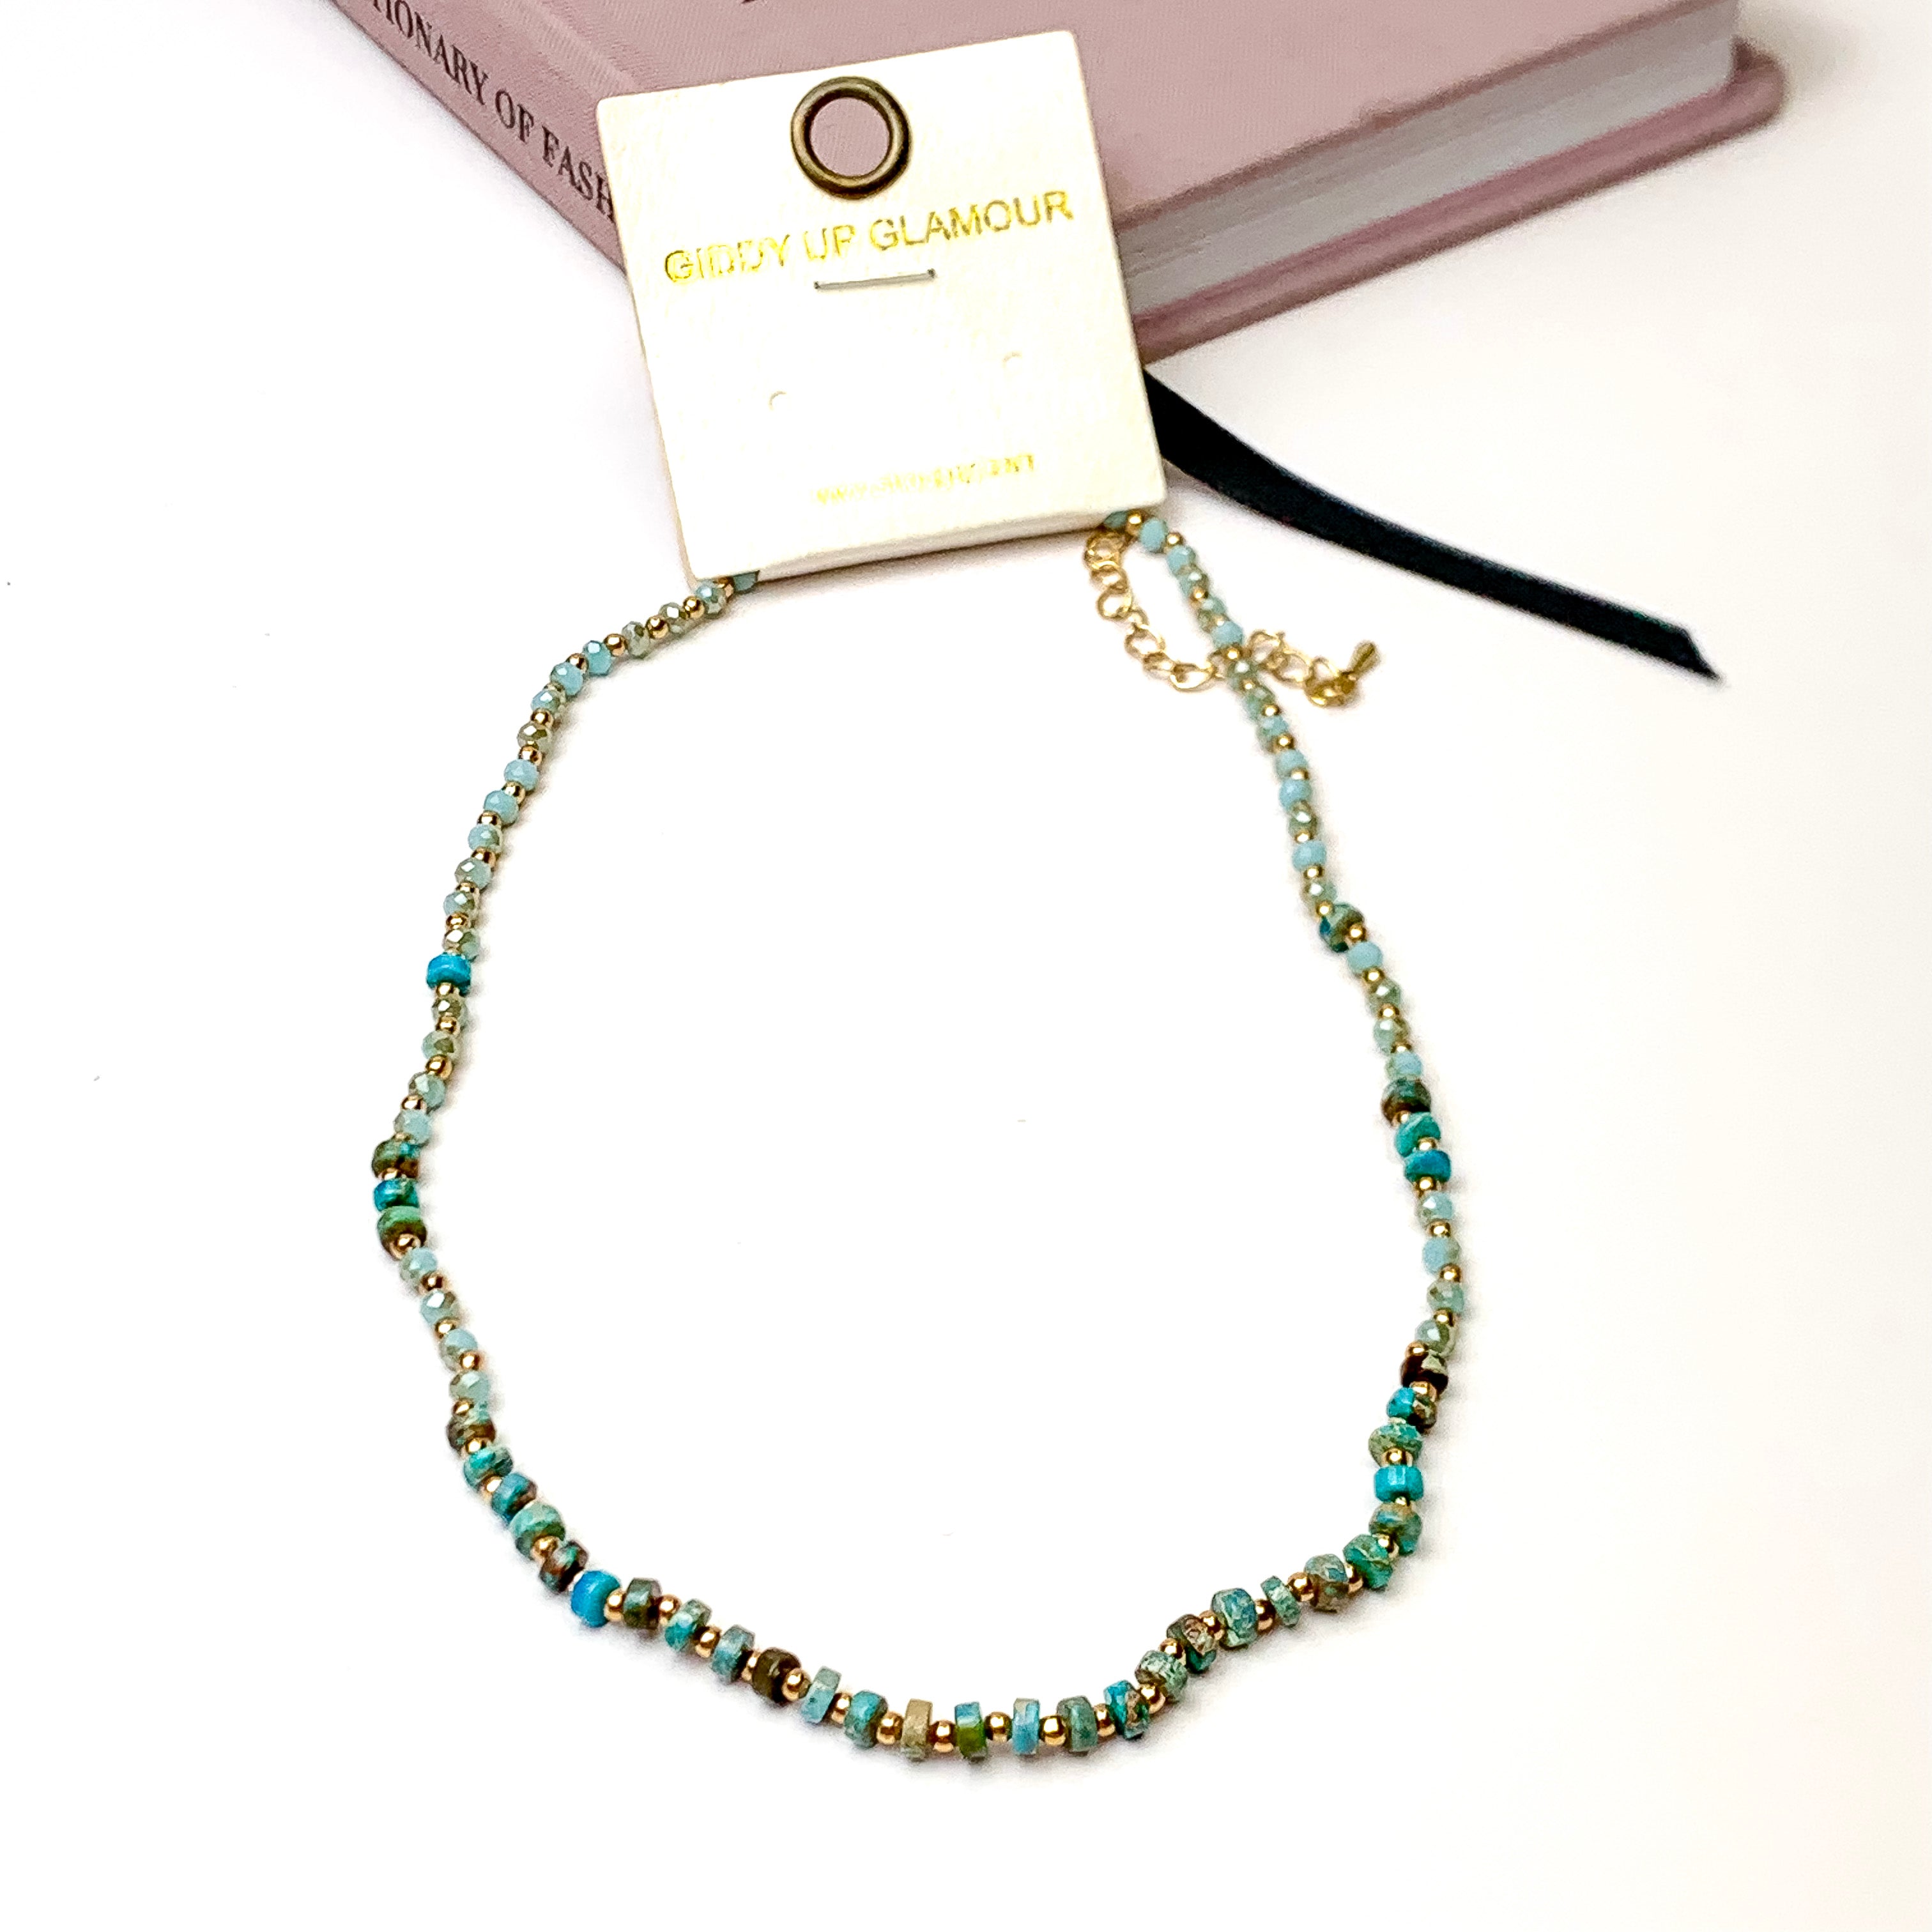 Natural Stone and Crystal Beaded Necklace in Turquoise Blue - Giddy Up Glamour Boutique